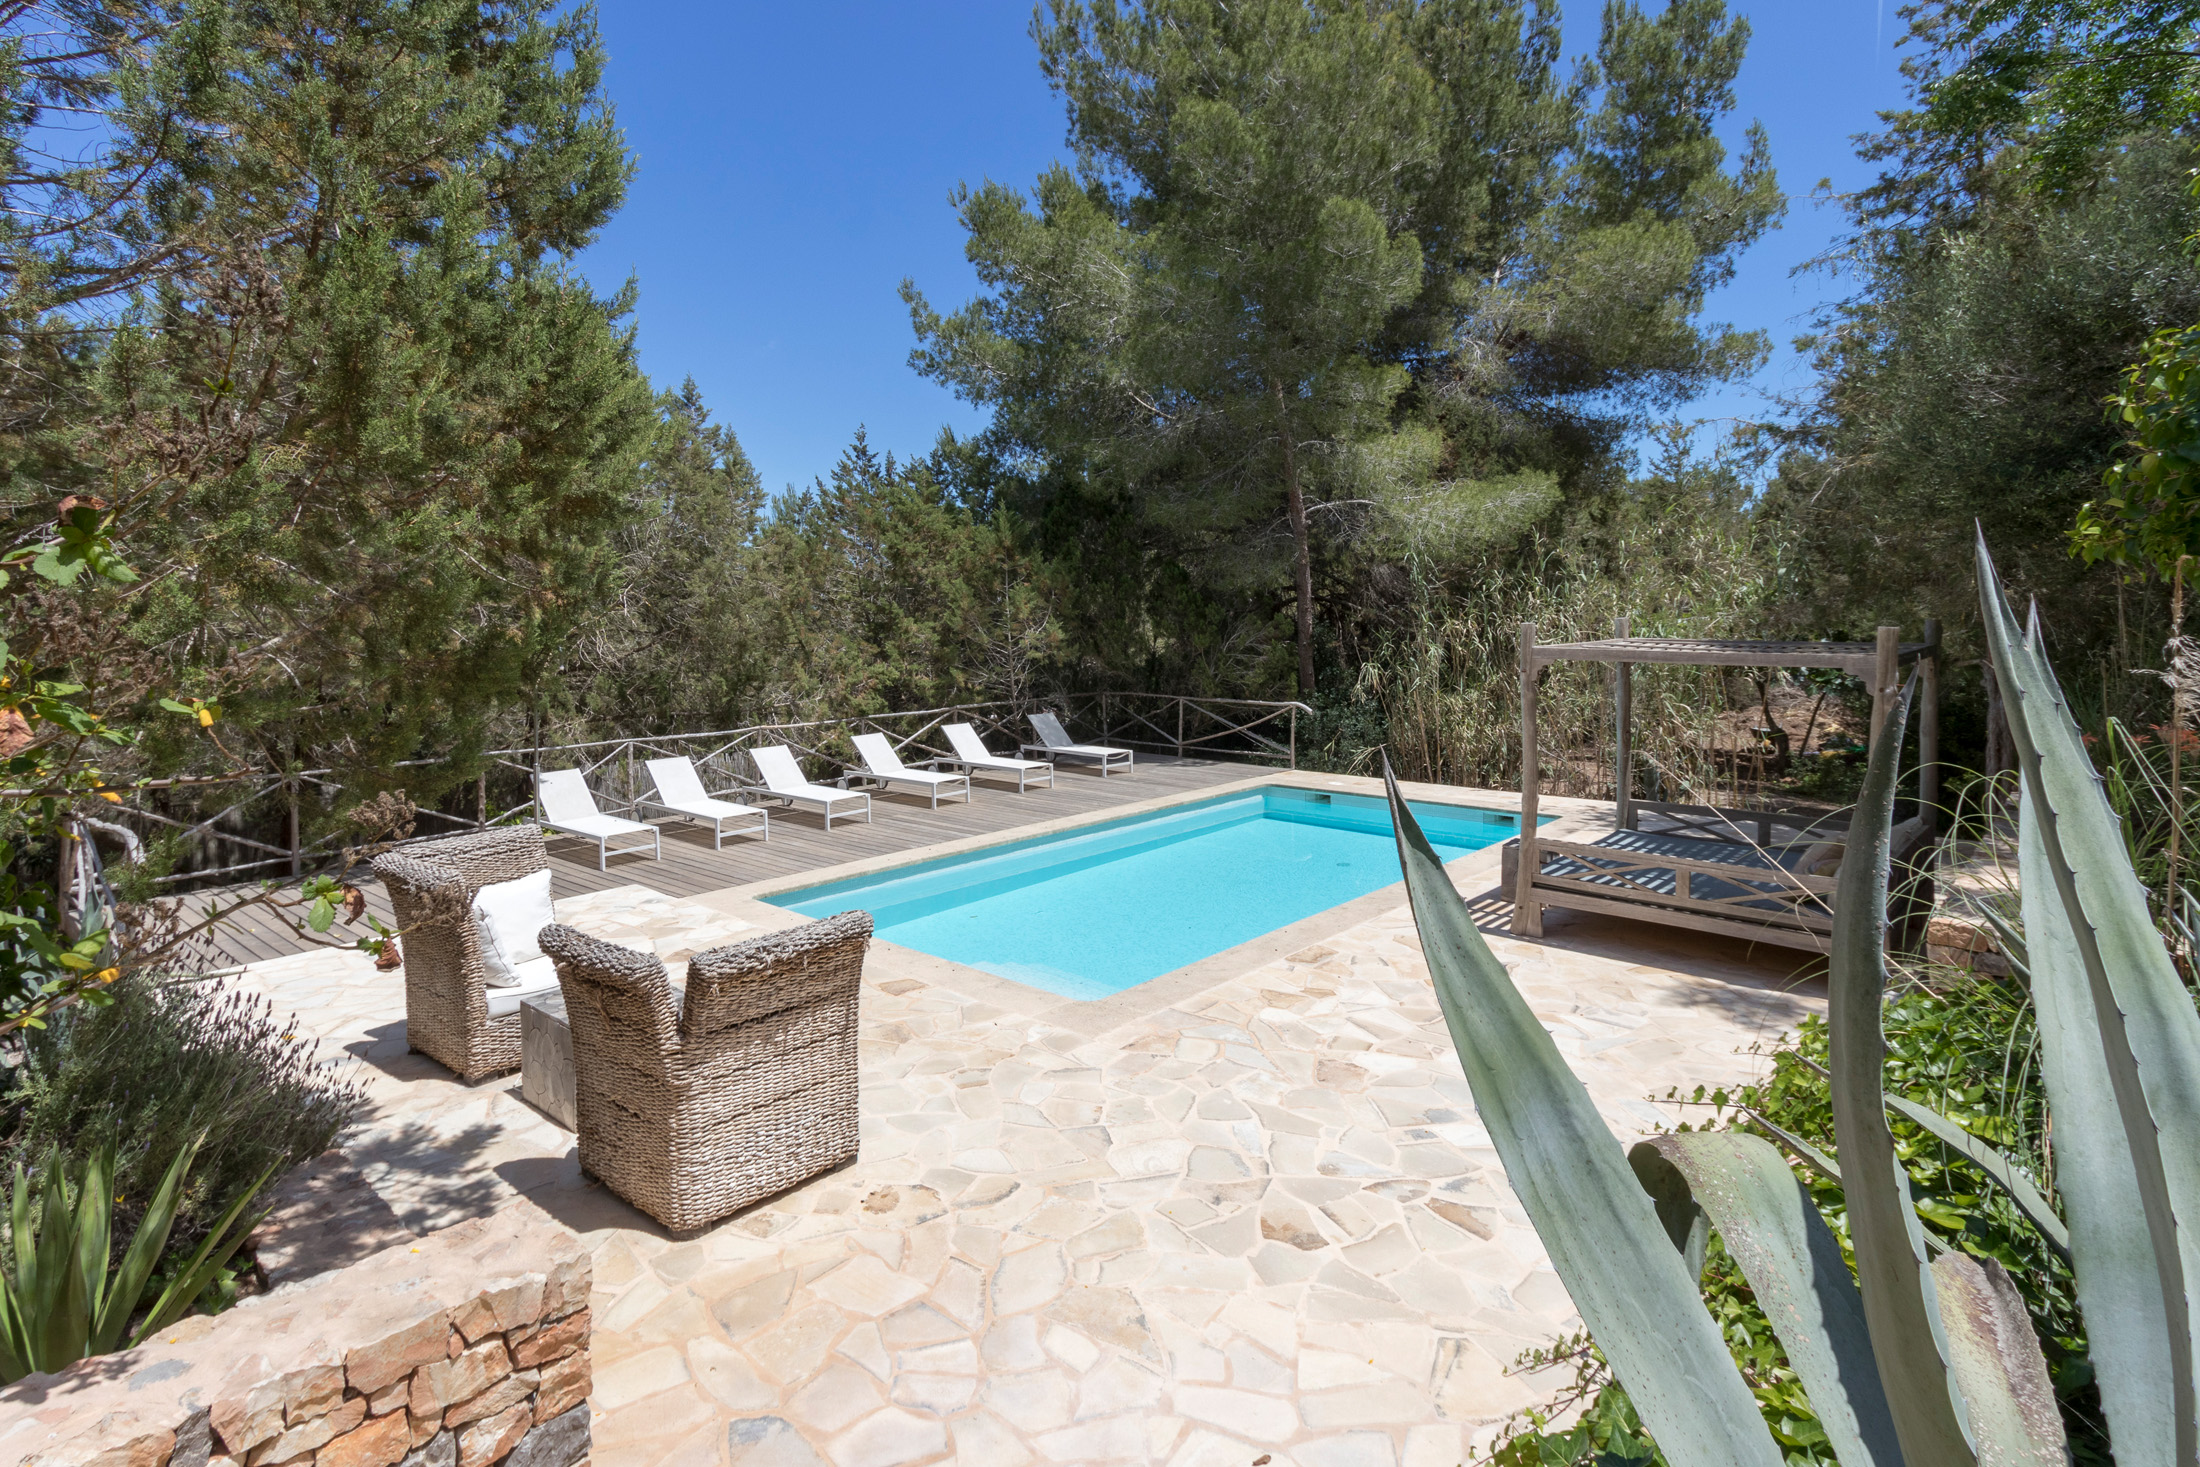 Pool of a luxury villa to buy in Ibiza